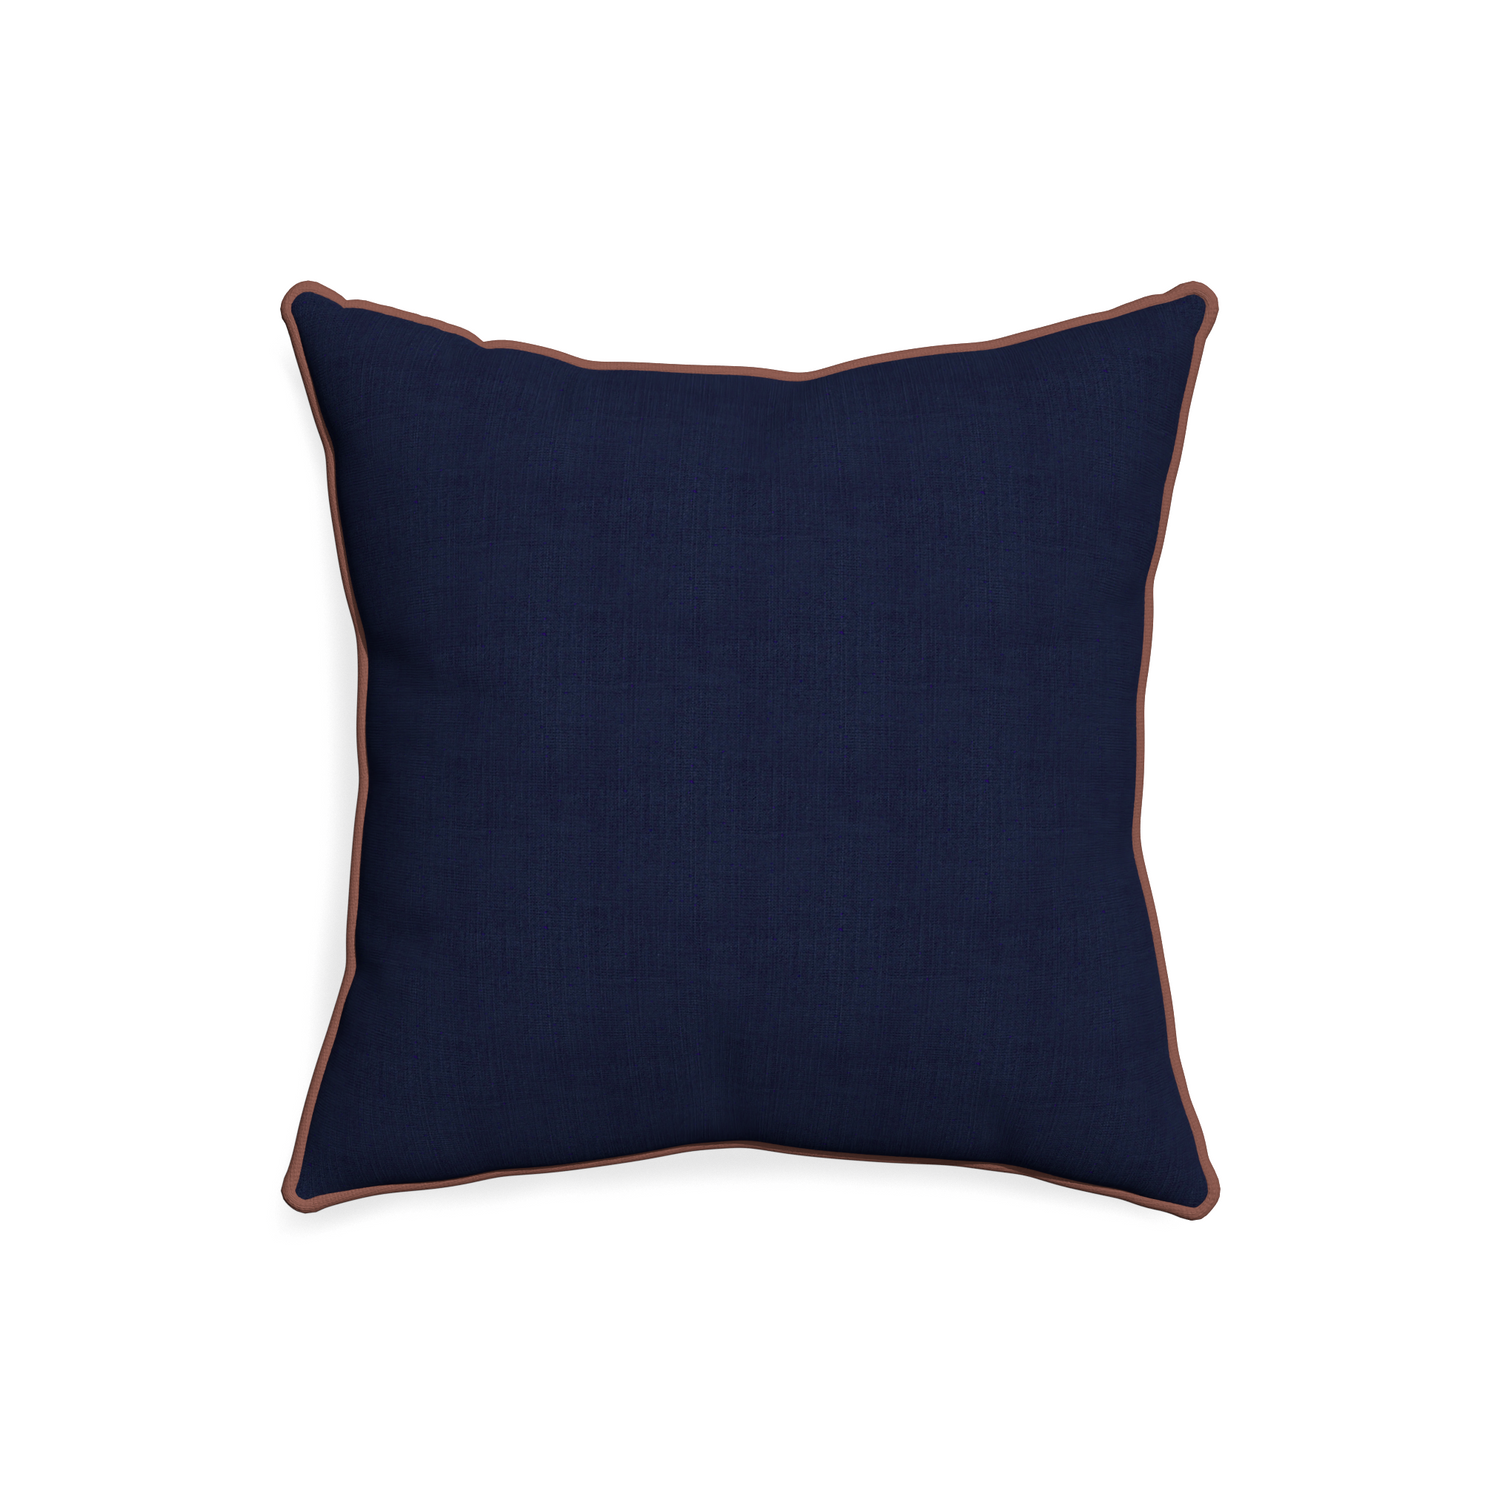 20-square midnight custom pillow with w piping on white background